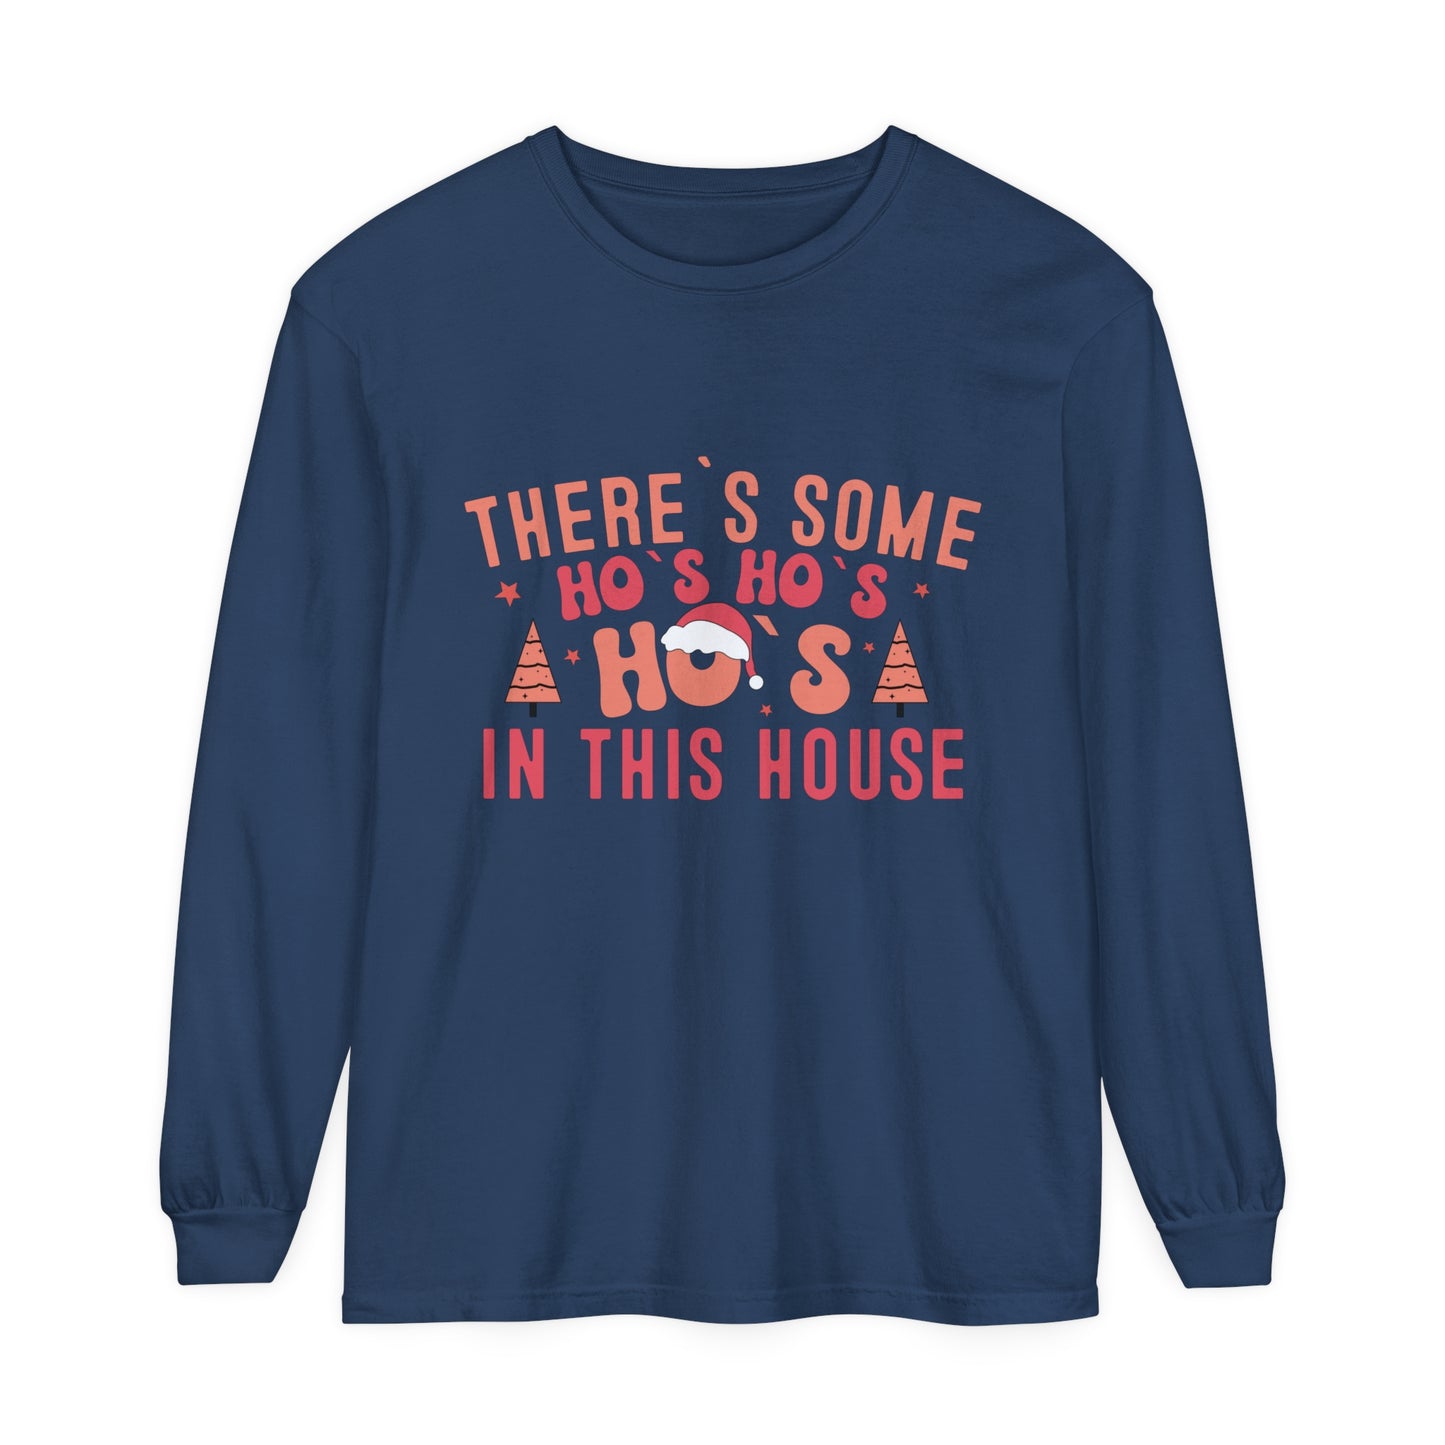 There's some HO HO HOs in this house Women's Funny Humor Christmas Holiday Loose Long Sleeve T-Shirt